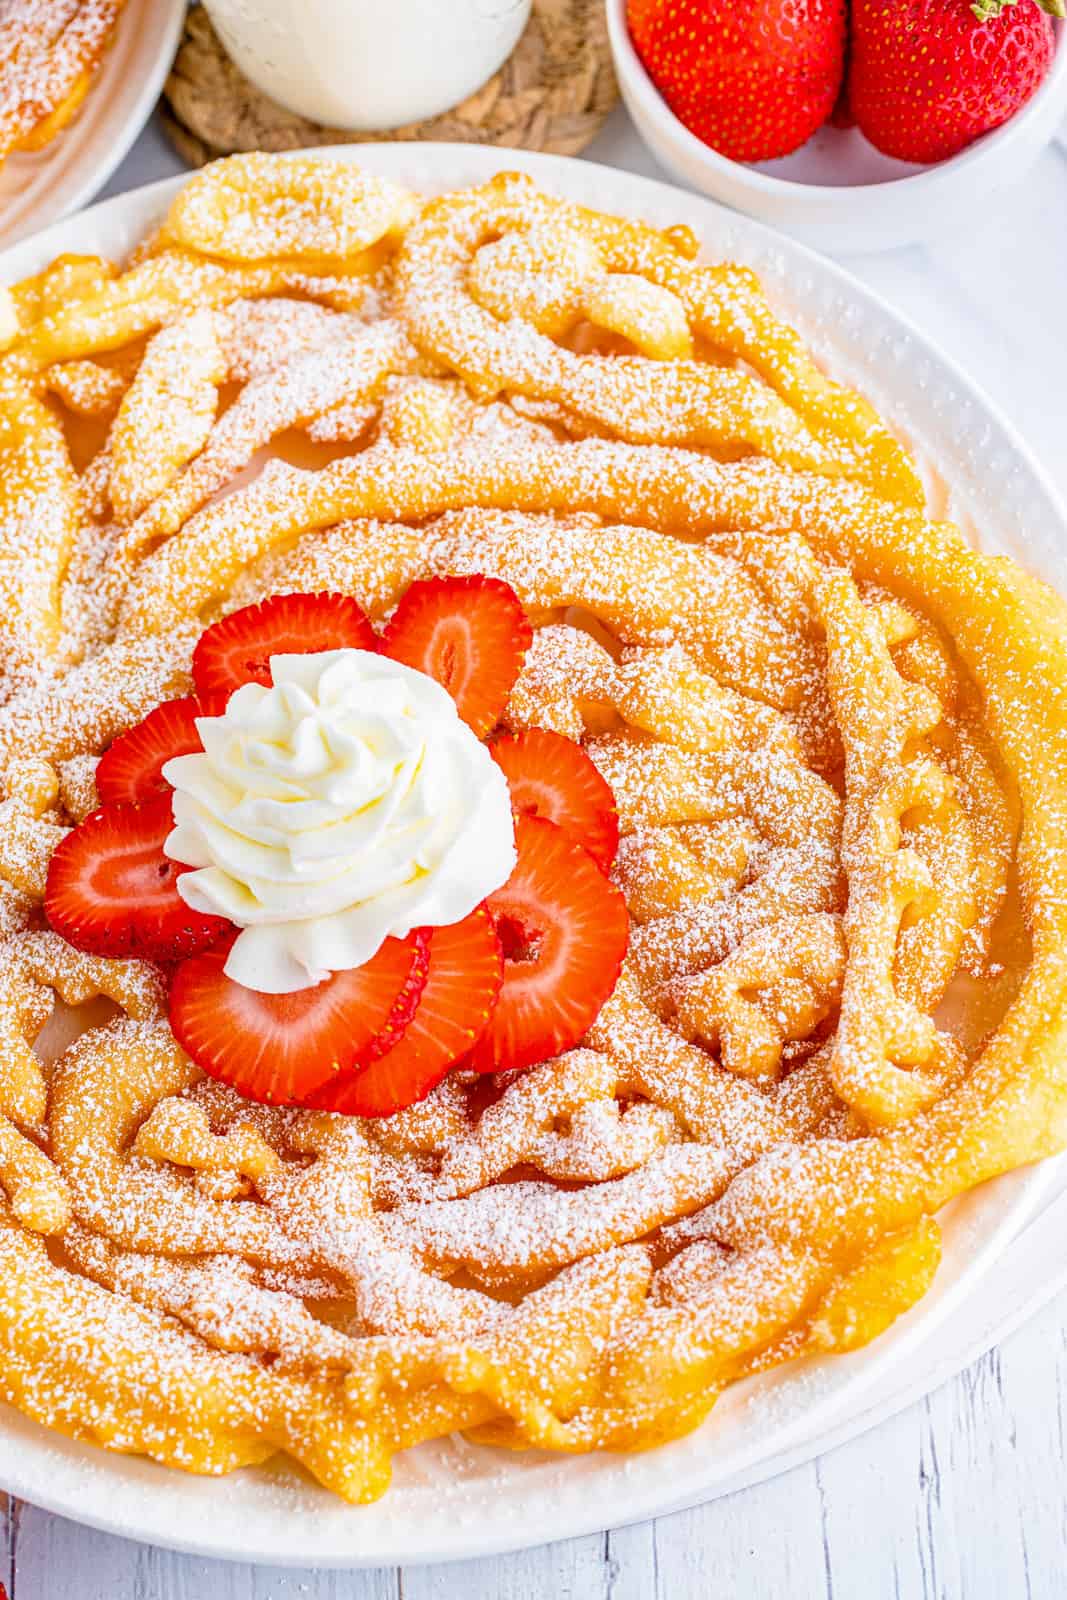 Overhead photo of finished Funnel Cake on white plate topped with powdered sugar, strawberries and whipped cream